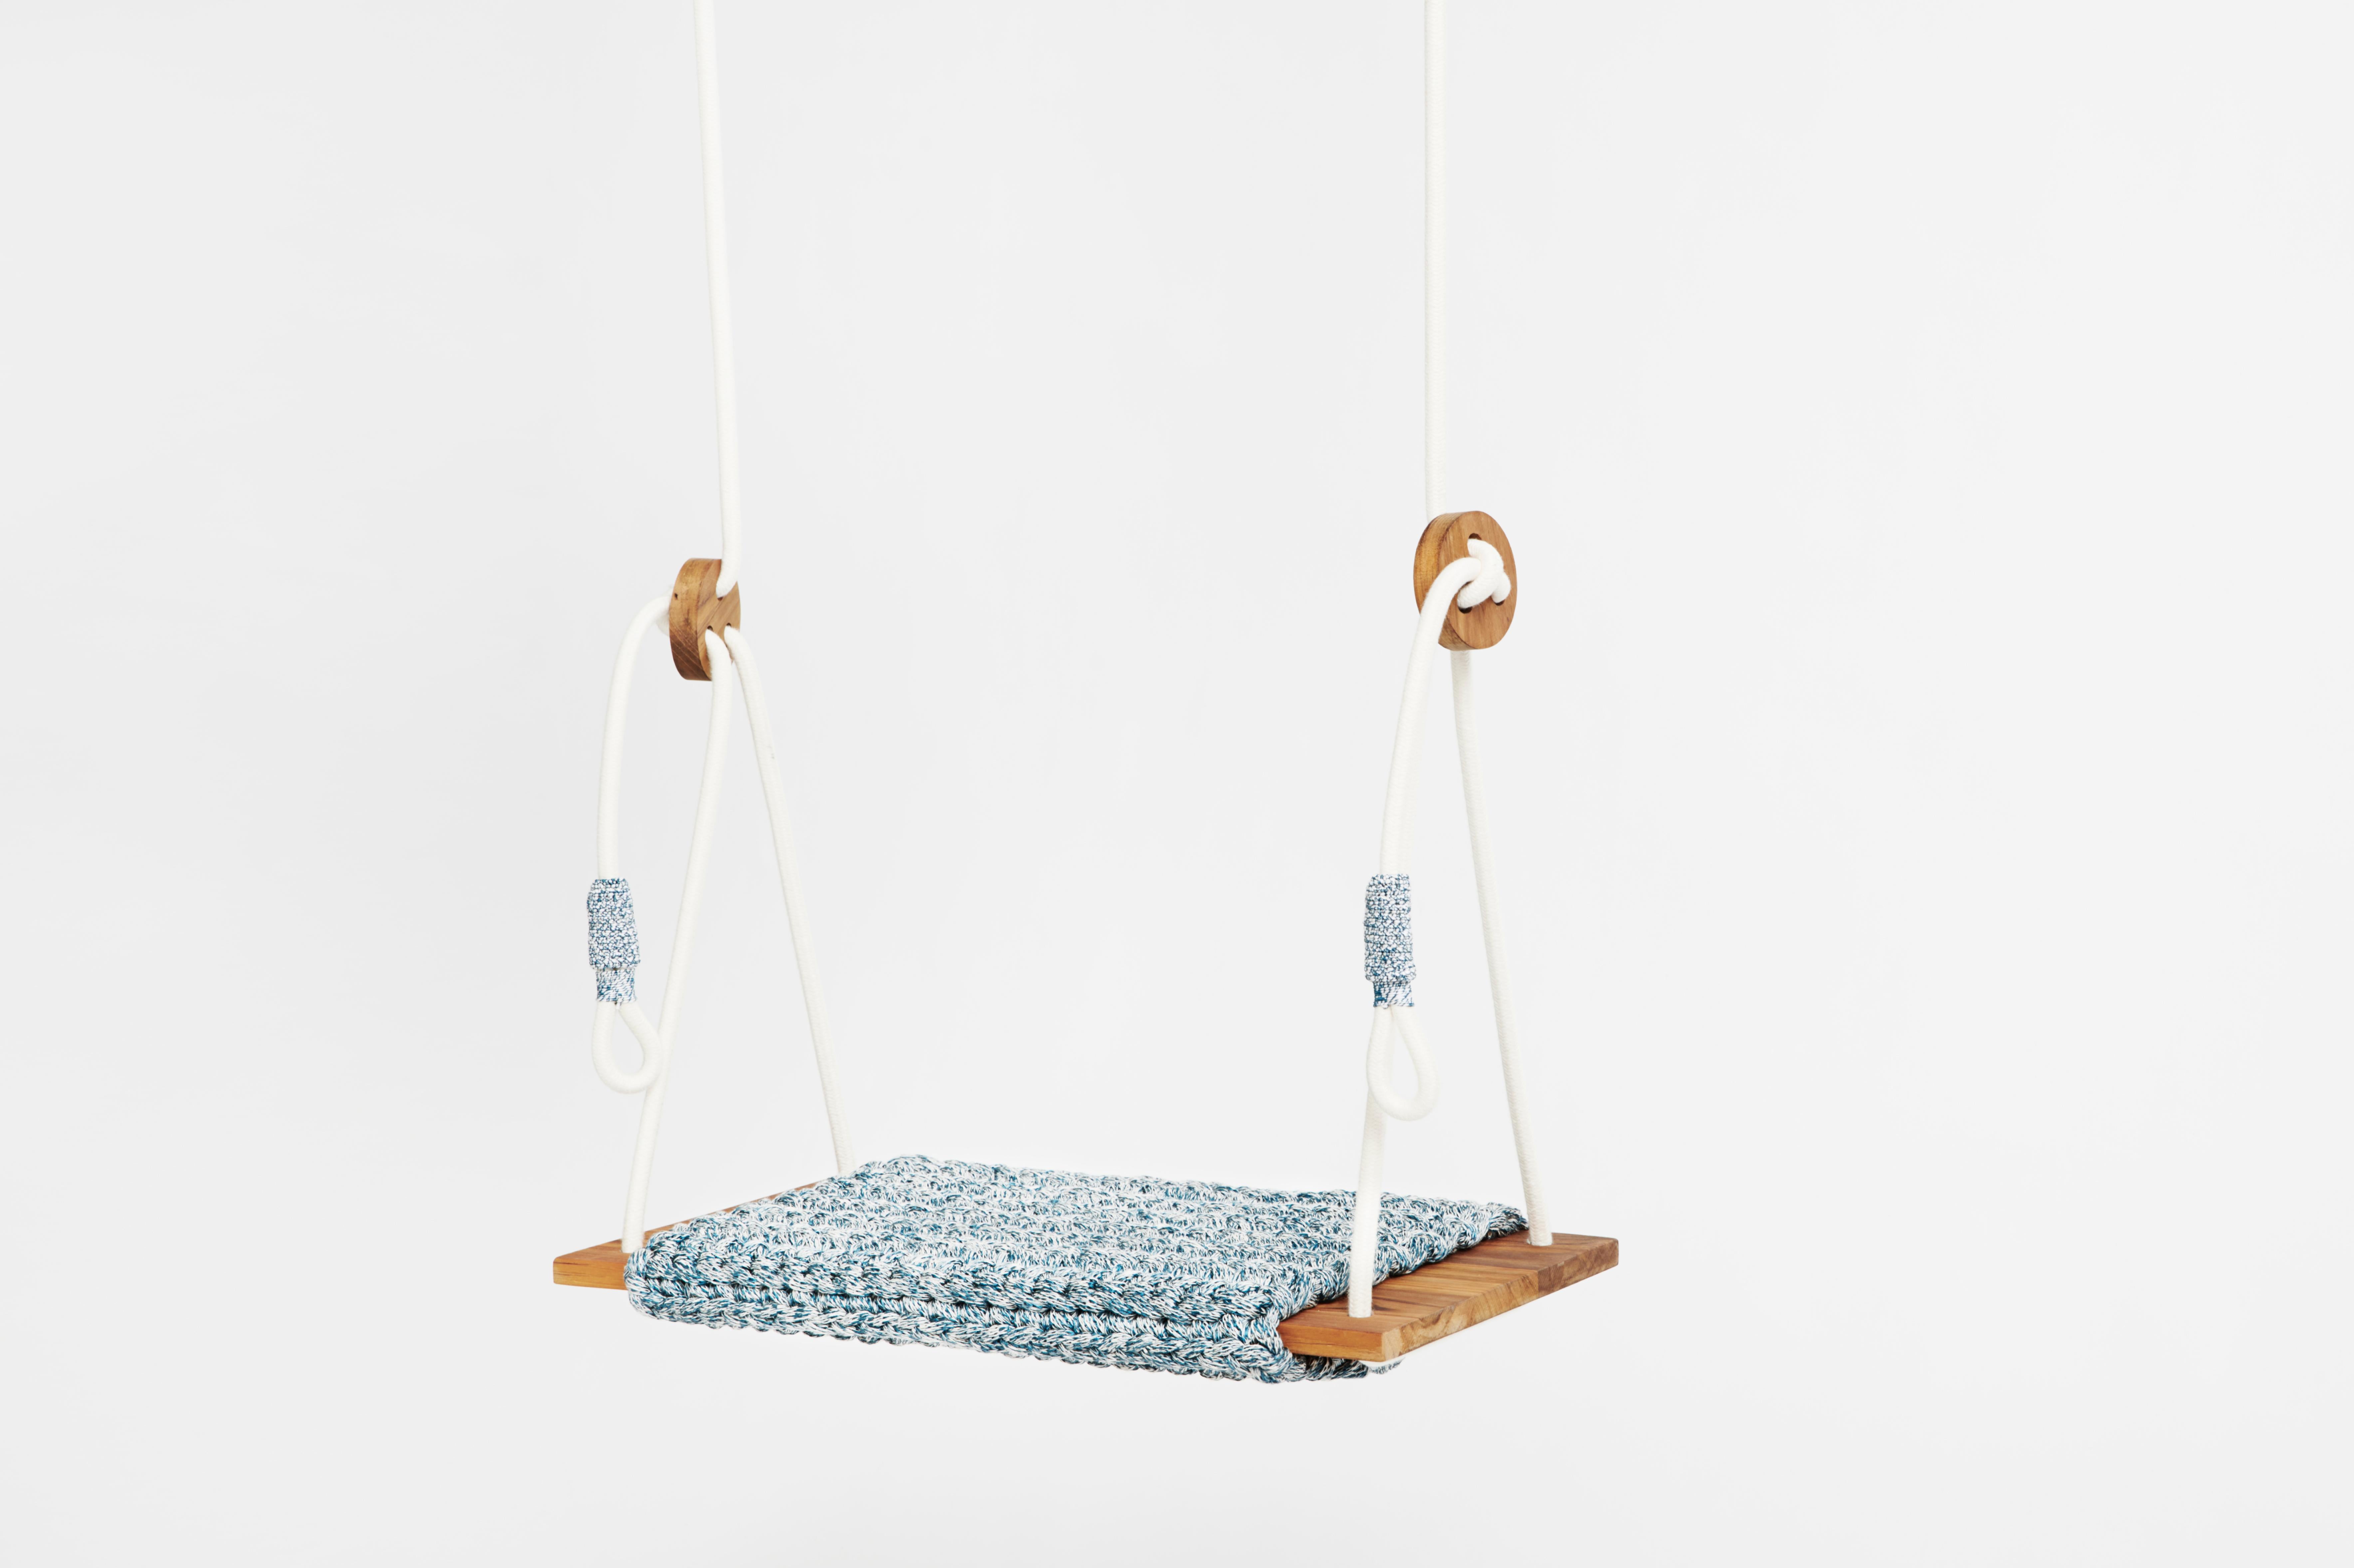 The iota rug swing, inspired by tracking in the desert and the North African culture, takes the user to a wild, natural, fantastic place. The swing showcases our special knitted hand work. It contains a knitted rug covering a wooden slag, which is